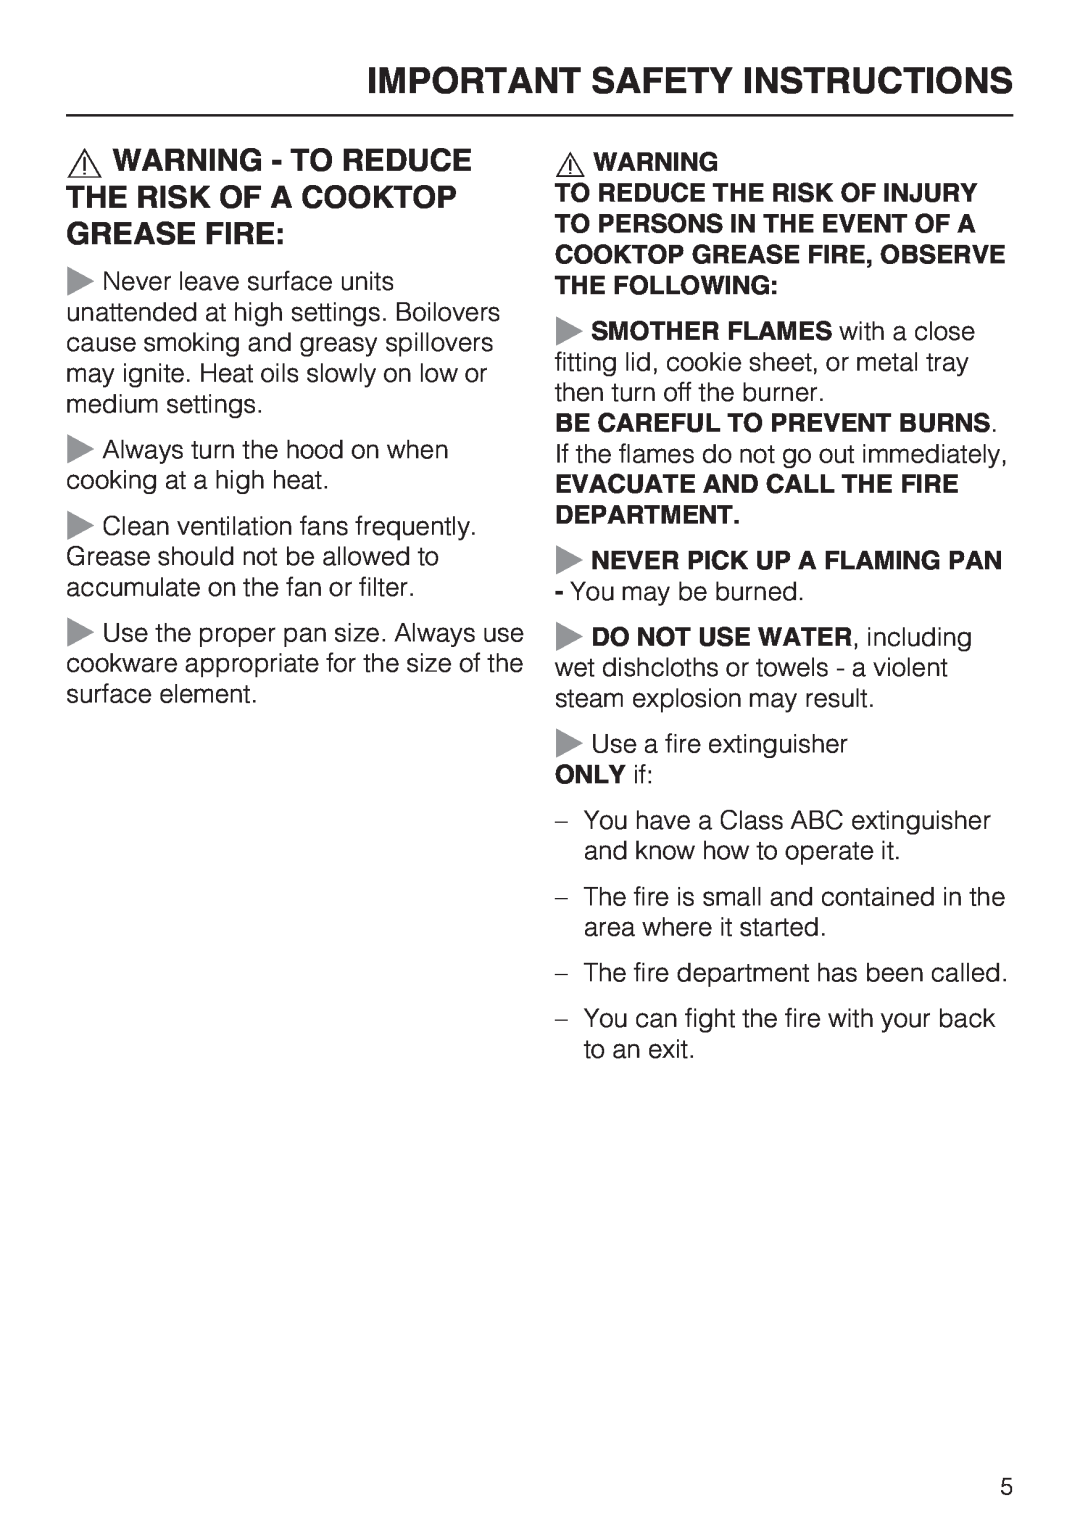 Miele DA2280, DA2210 installation instructions Important Safety Instructions, Evacuate And Call The Fire Department 